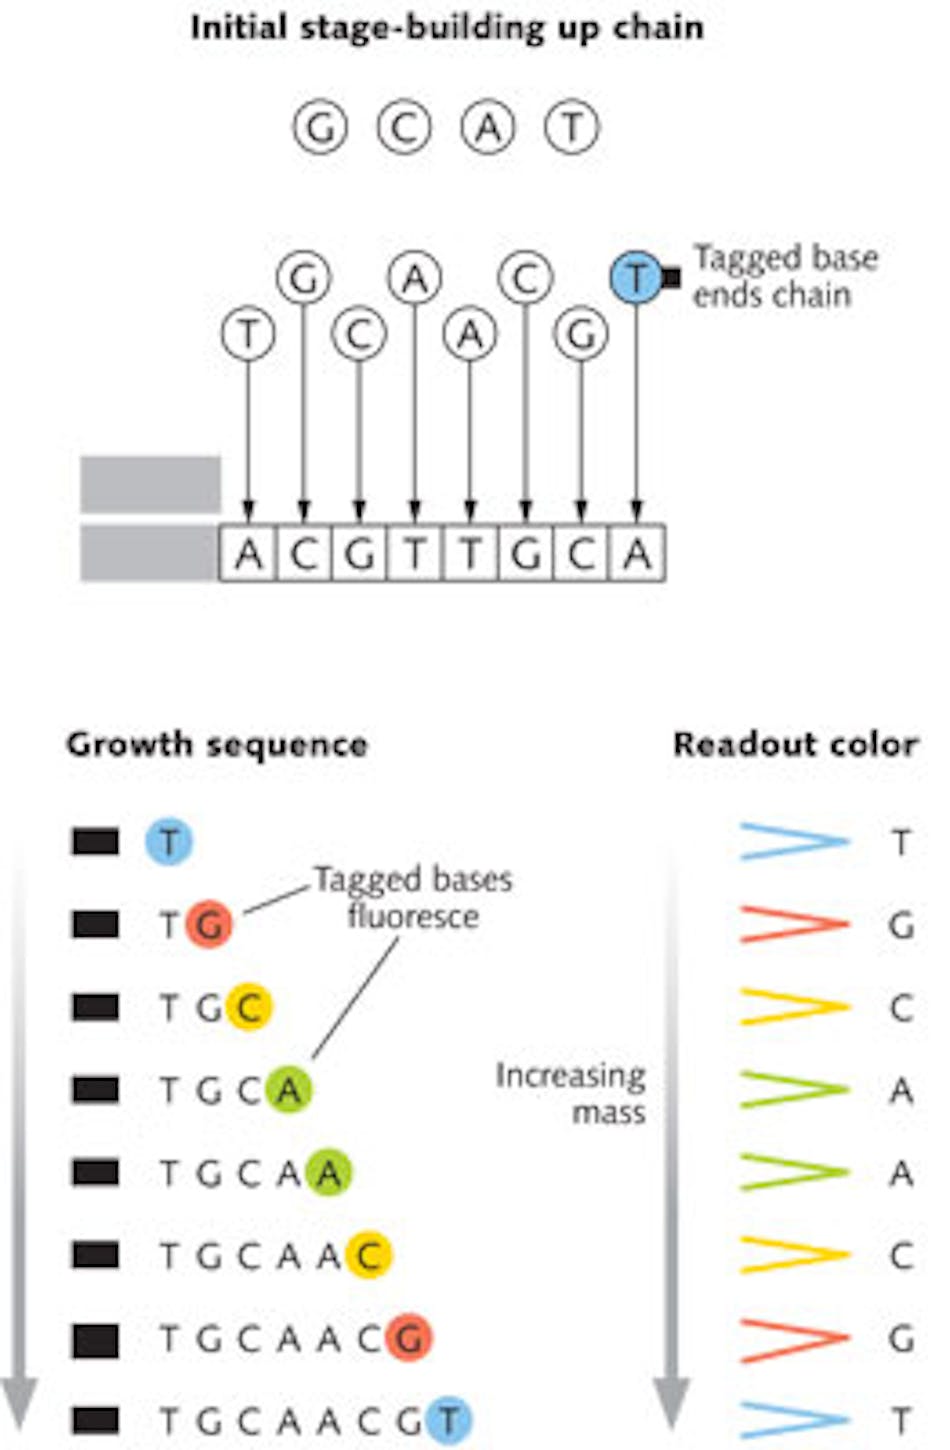 FIGURE 1. Sequencing DNA by building up a complementary chain in the Sanger process. Unlabeled bases accumulate one by one until a tagged base carrying a fluorescent dye terminates the chain. The chains are separated by mass then excited with light that produces the characteristic fluorescence of each tagged terminating base. The final sequence is complementary to the starting chain.